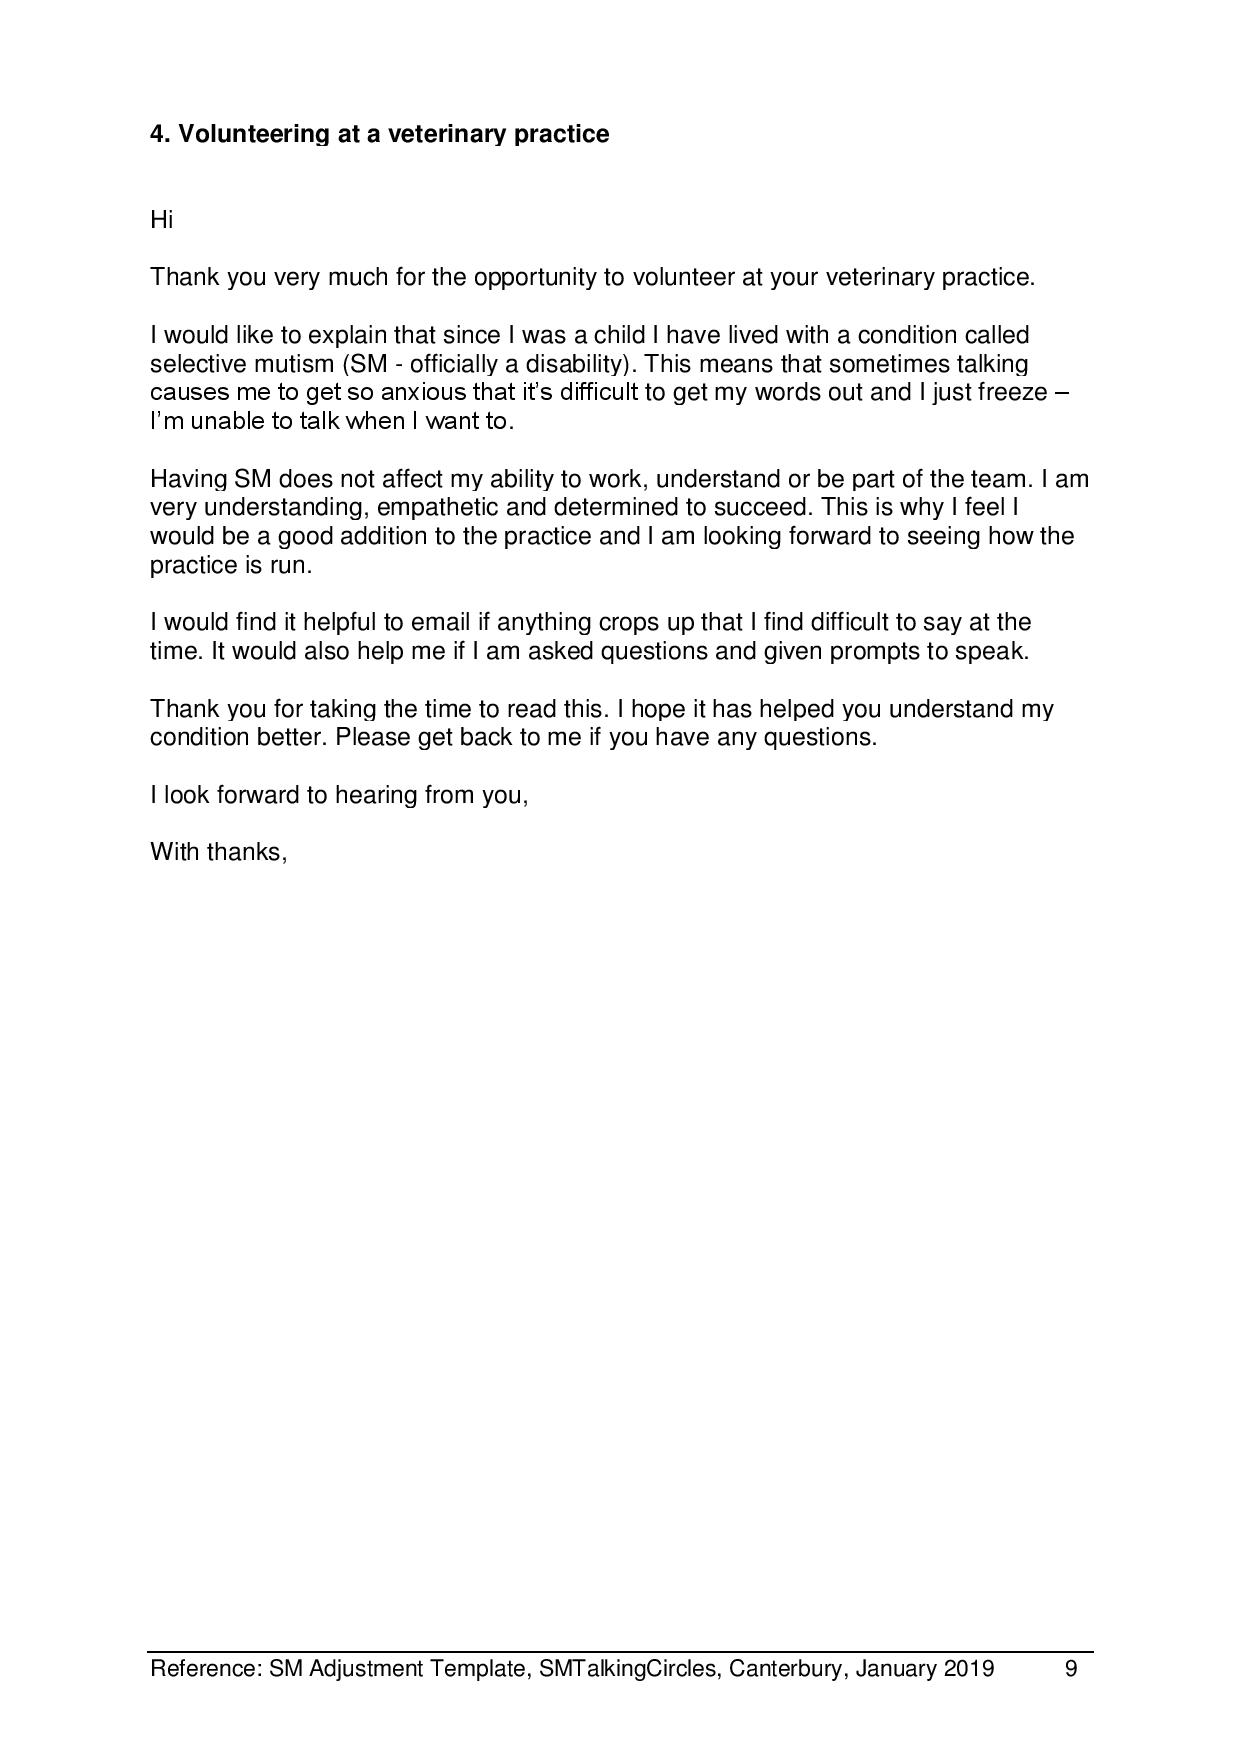 Volunteer Hours Letter Template from www.selectivemutism.org.uk